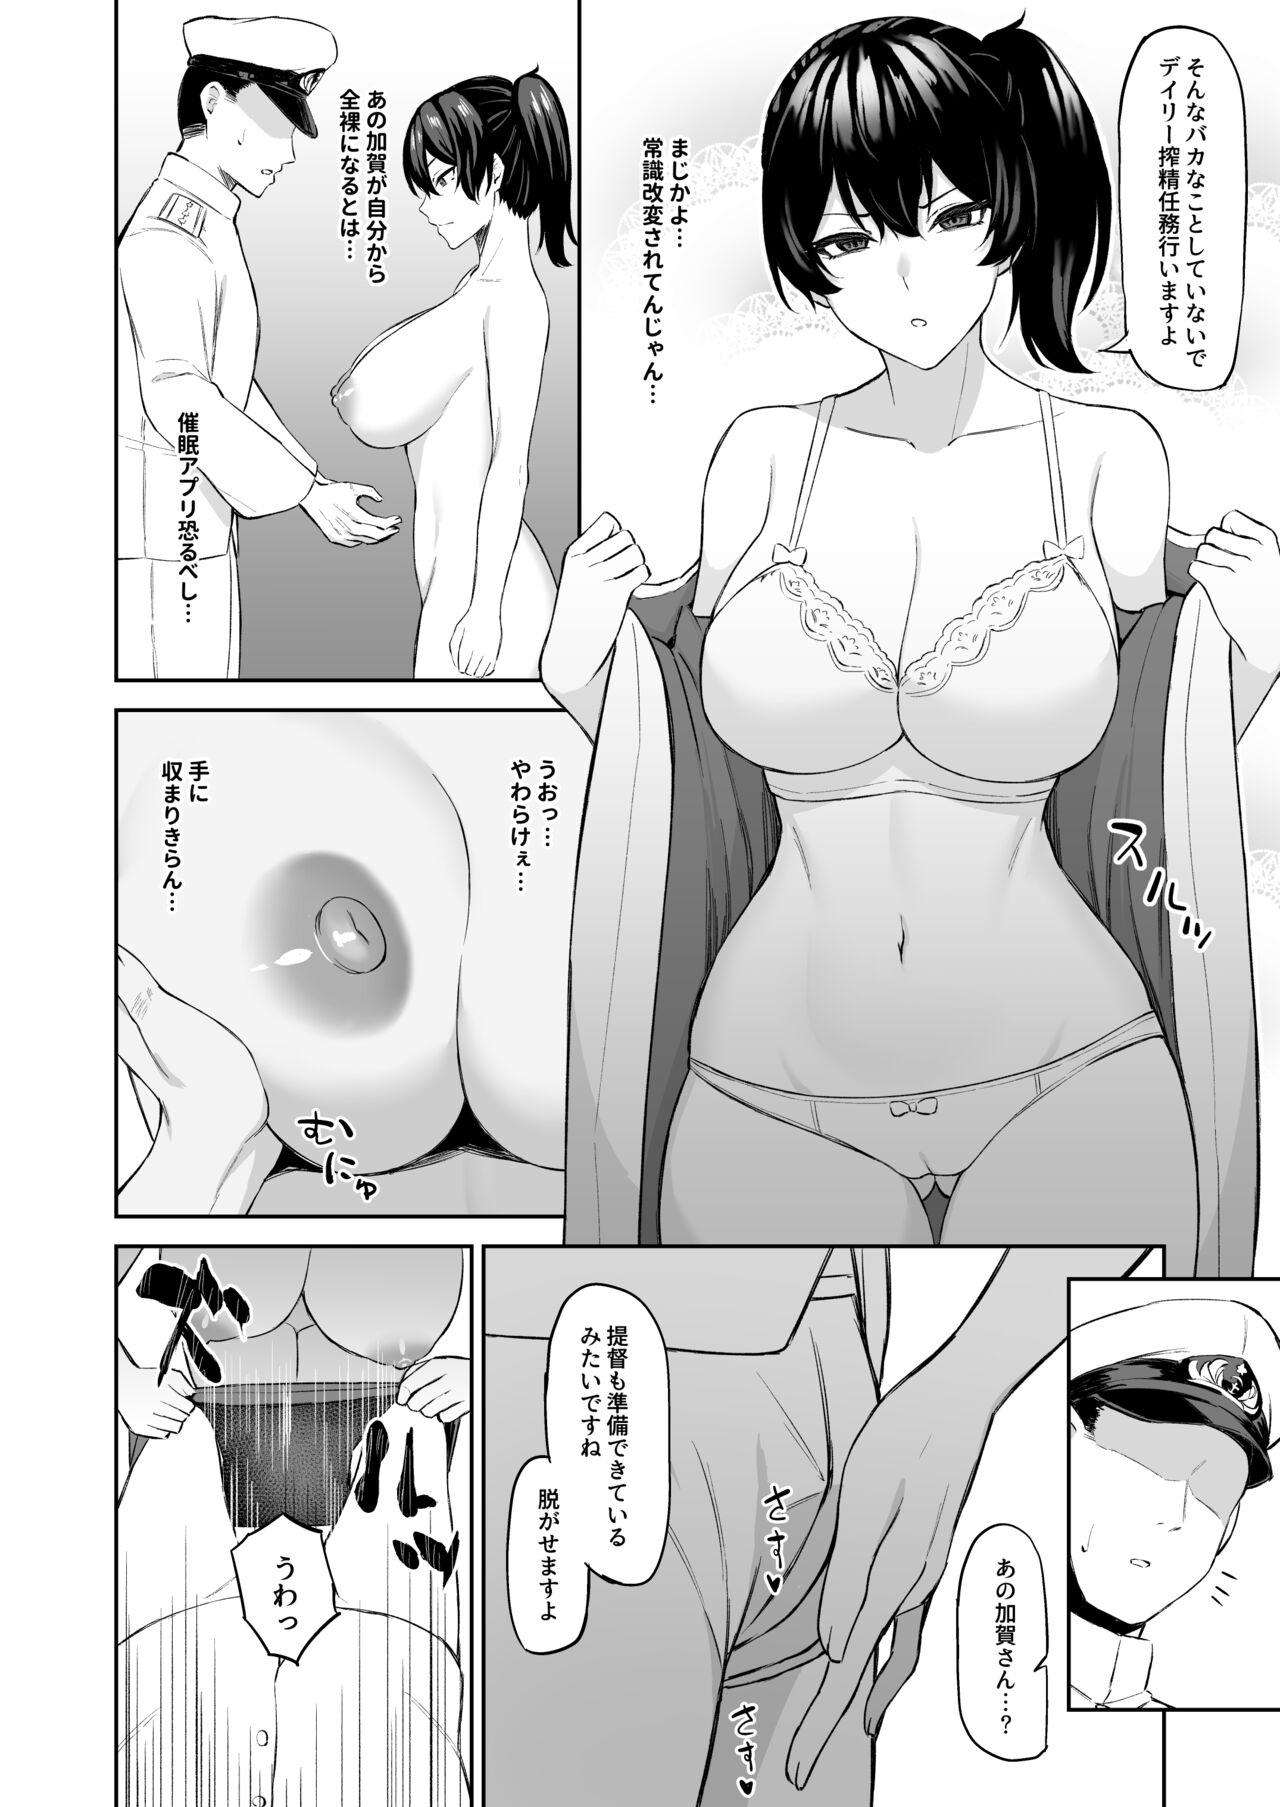 Massages 催眠加賀さん - Kantai collection Hiddencam - Picture 3